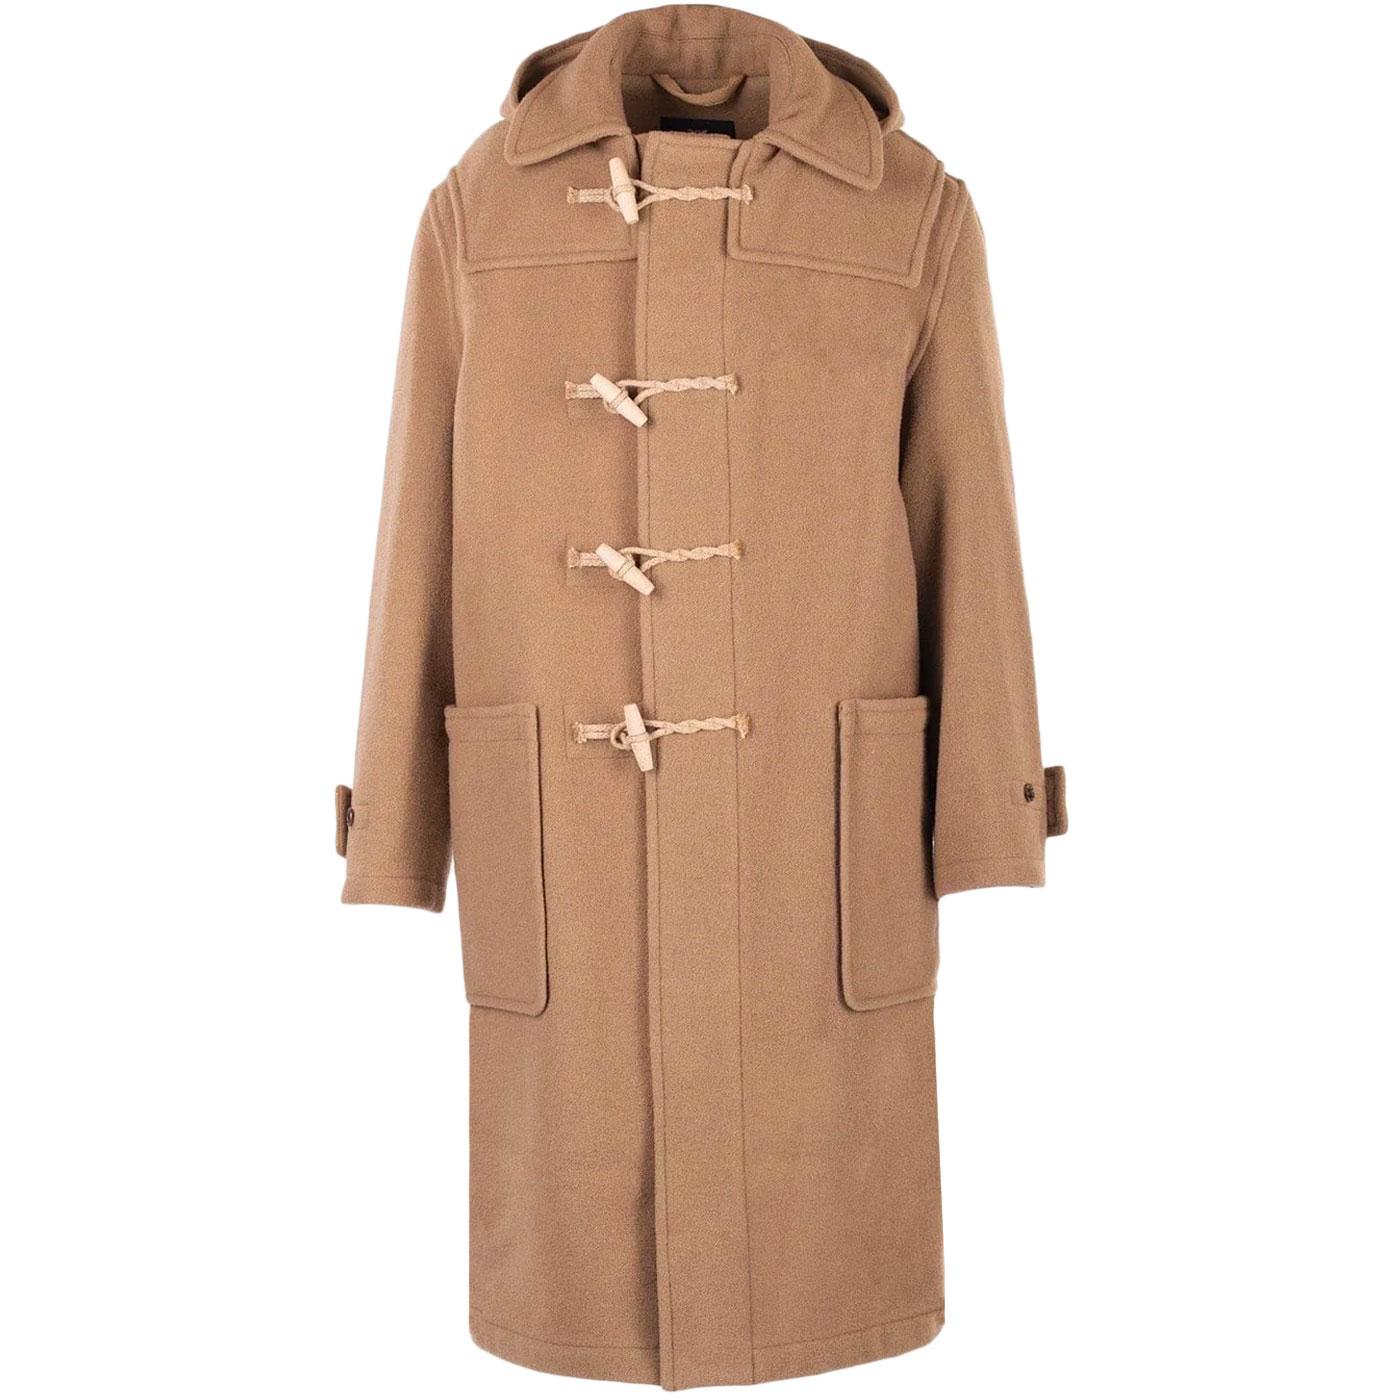 Harrison Gloverall Collared Duffle Coat  (Camel)